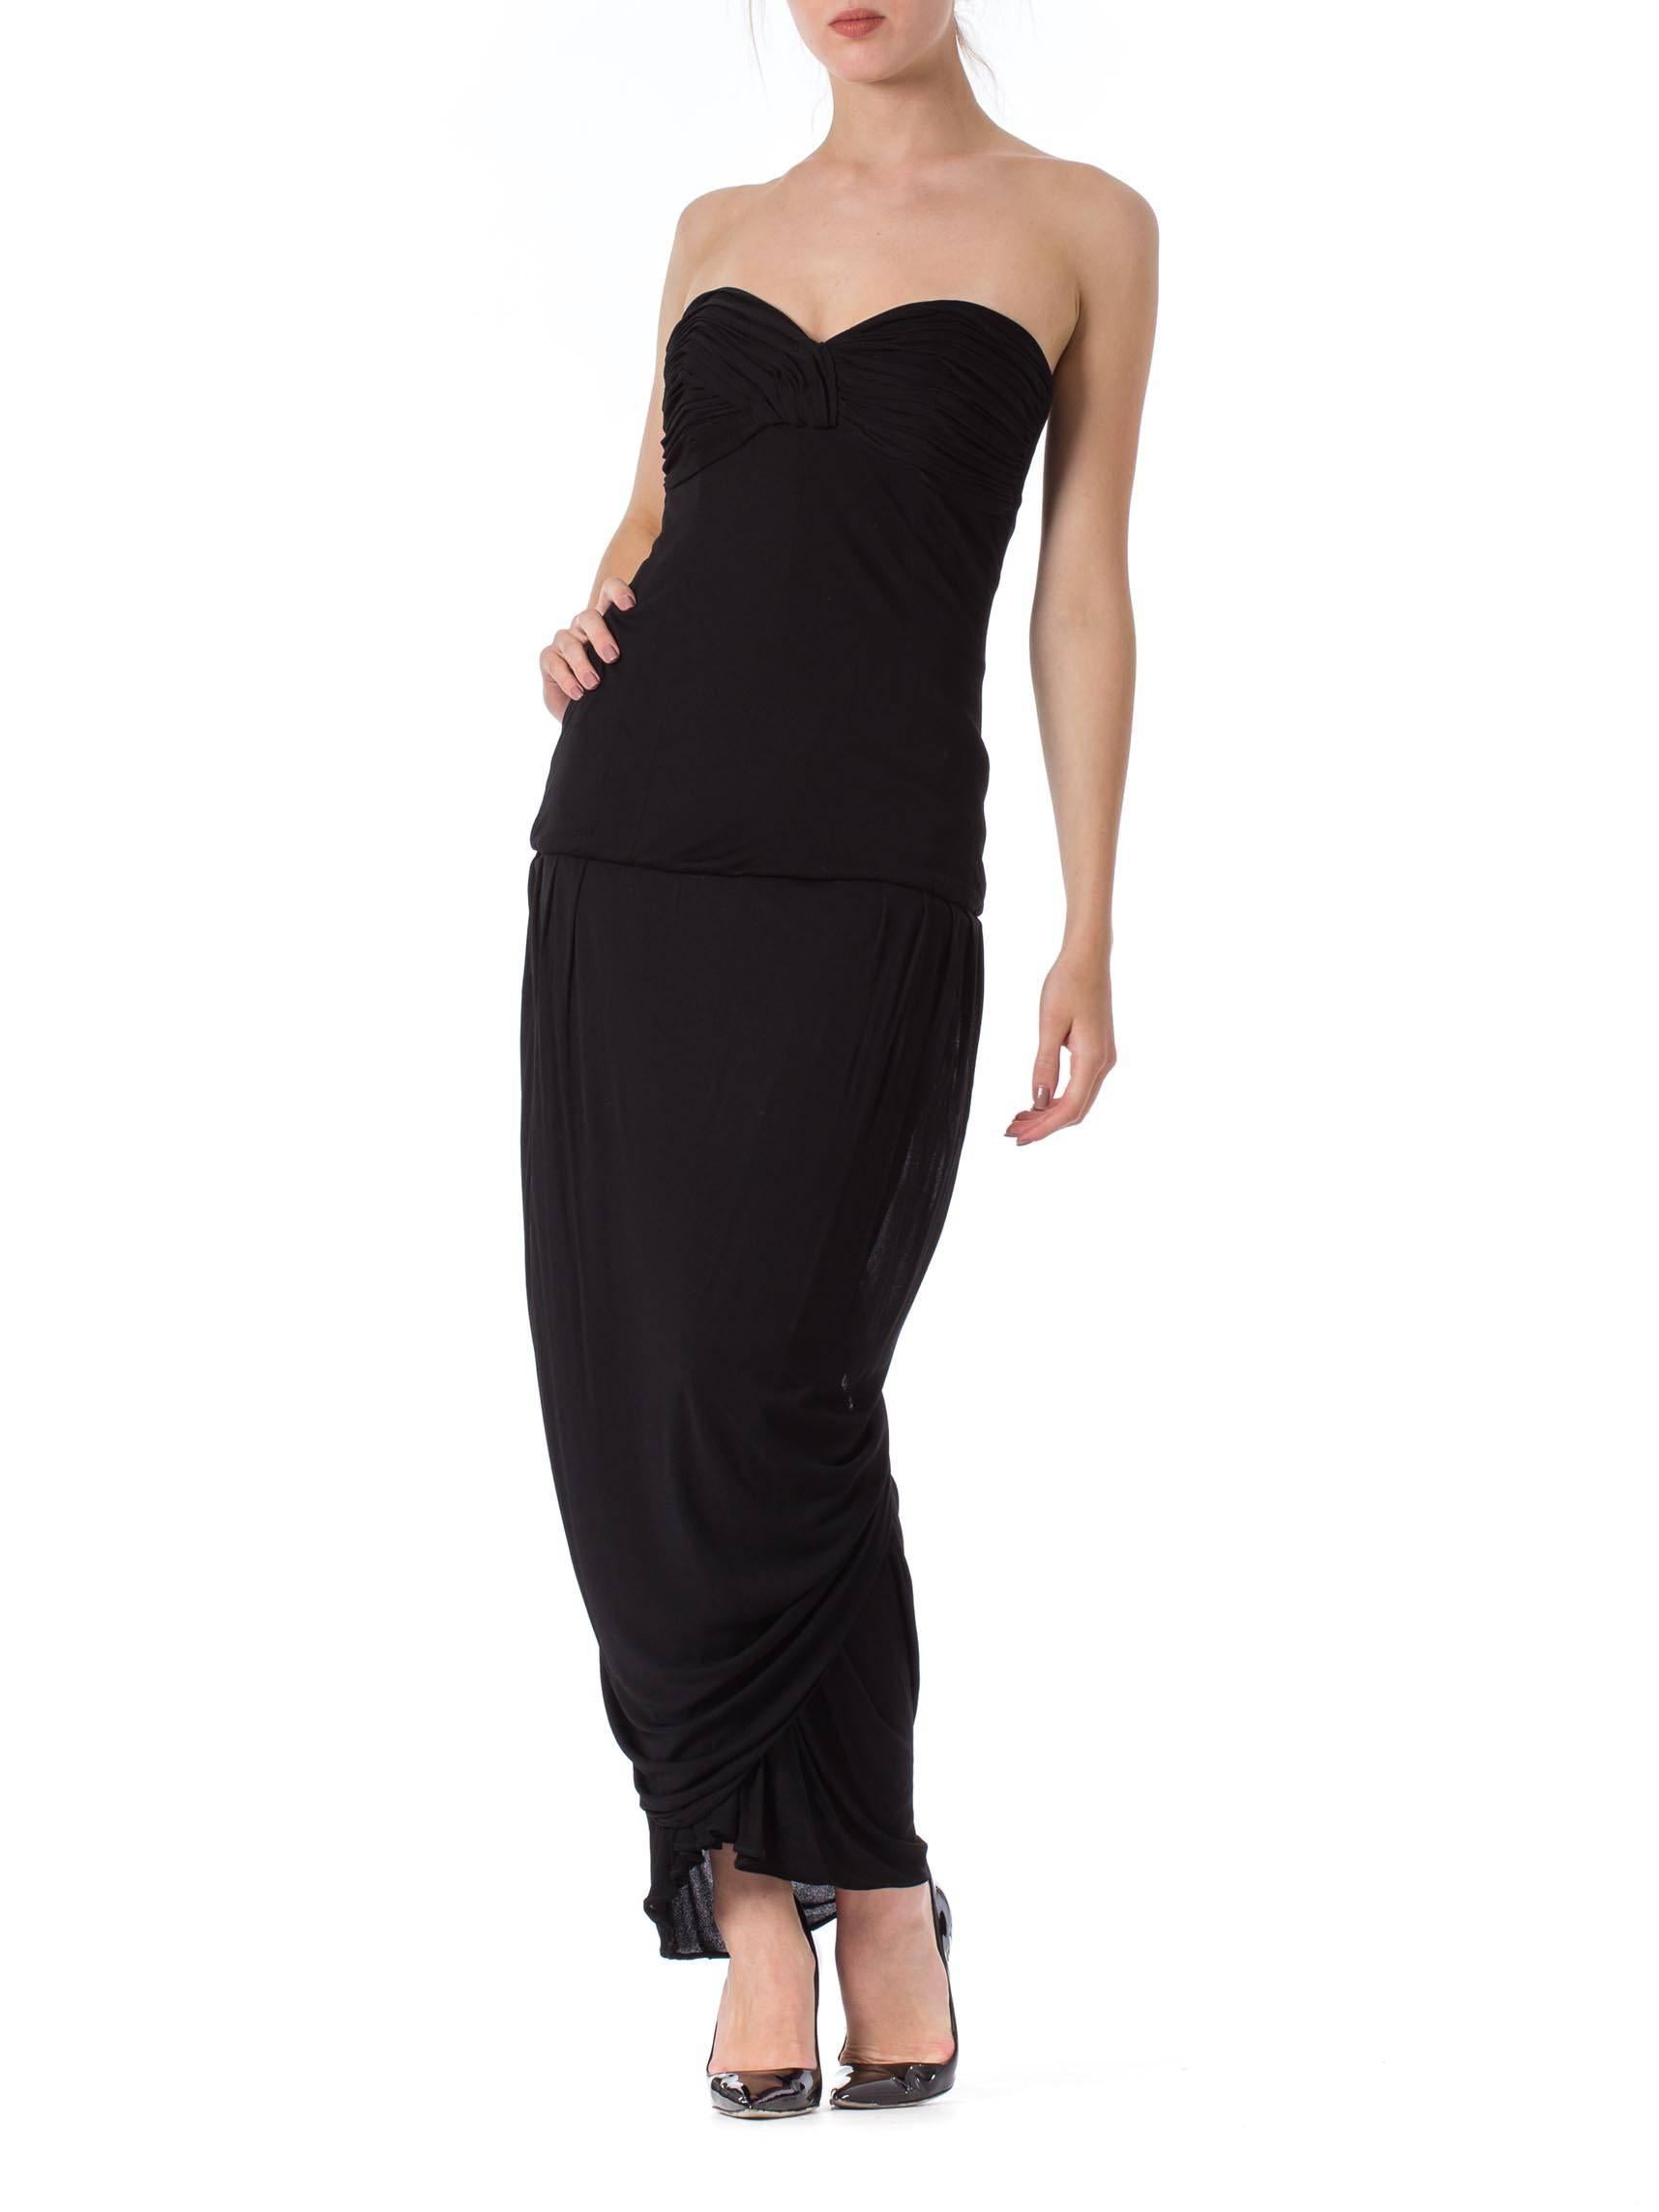 Classic, cool and sexy. Silk jersey drapes and wraps around the body creating interesting lines as the wearer moves about. The elegant strapless design stays in place as it is built on a fitted and boned bodice. Silk jersey is in great condition.